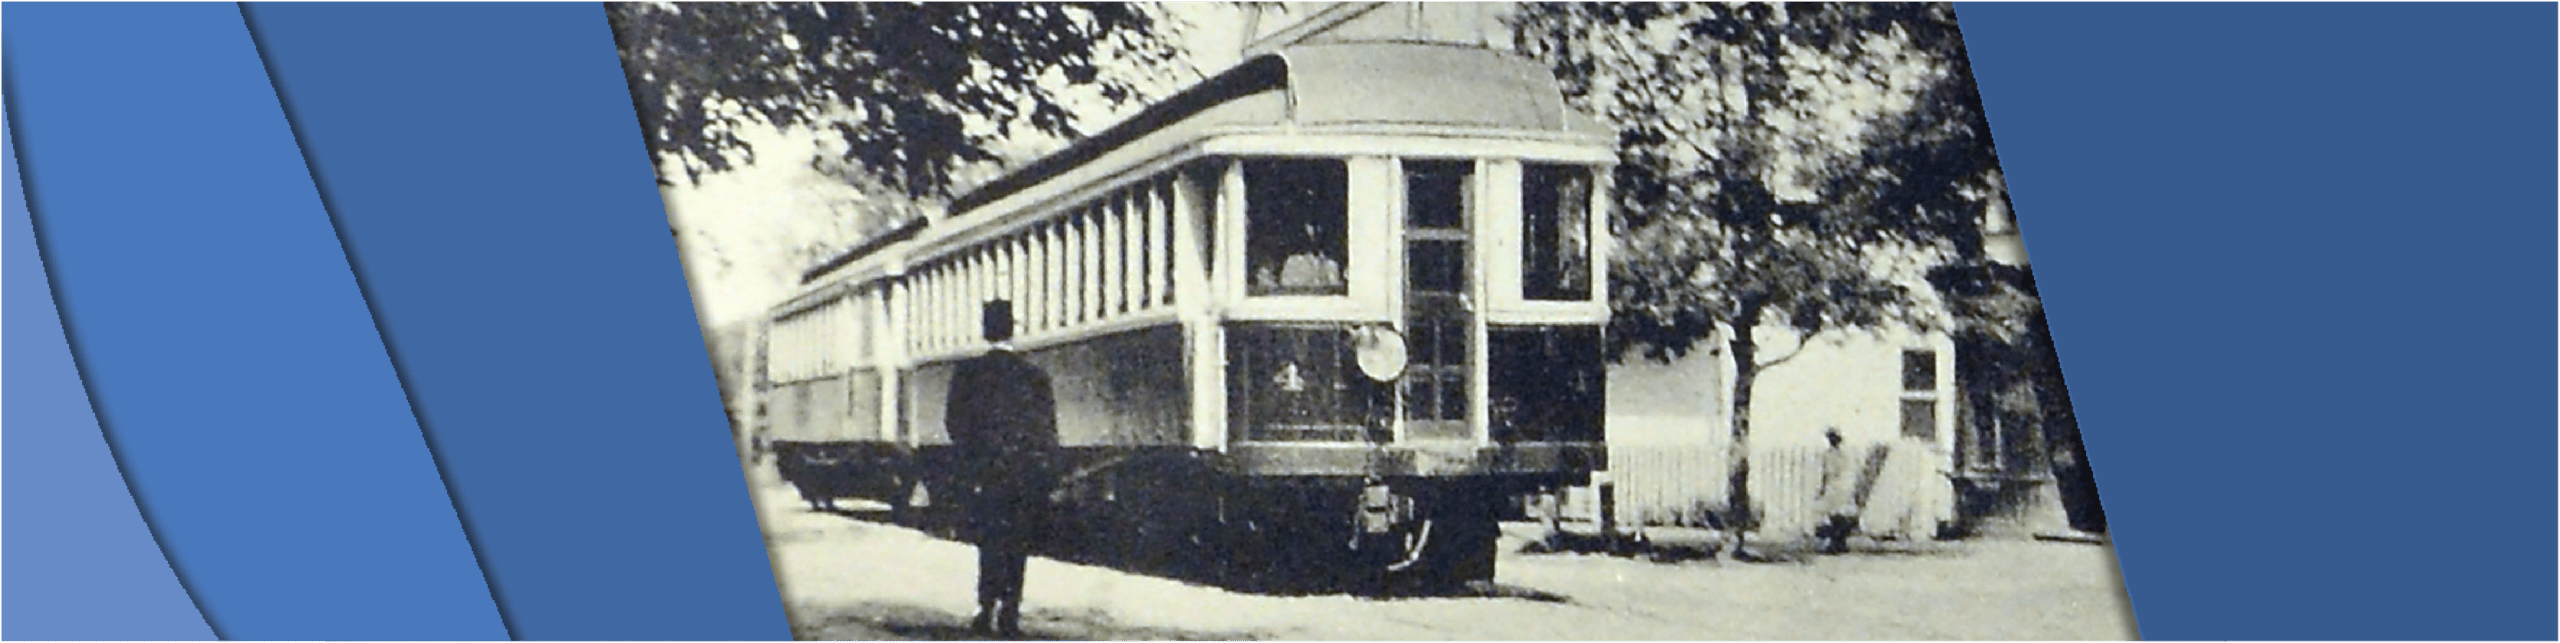 Photo of a streetcar traveling down a street with a gentleman watching it pass by.